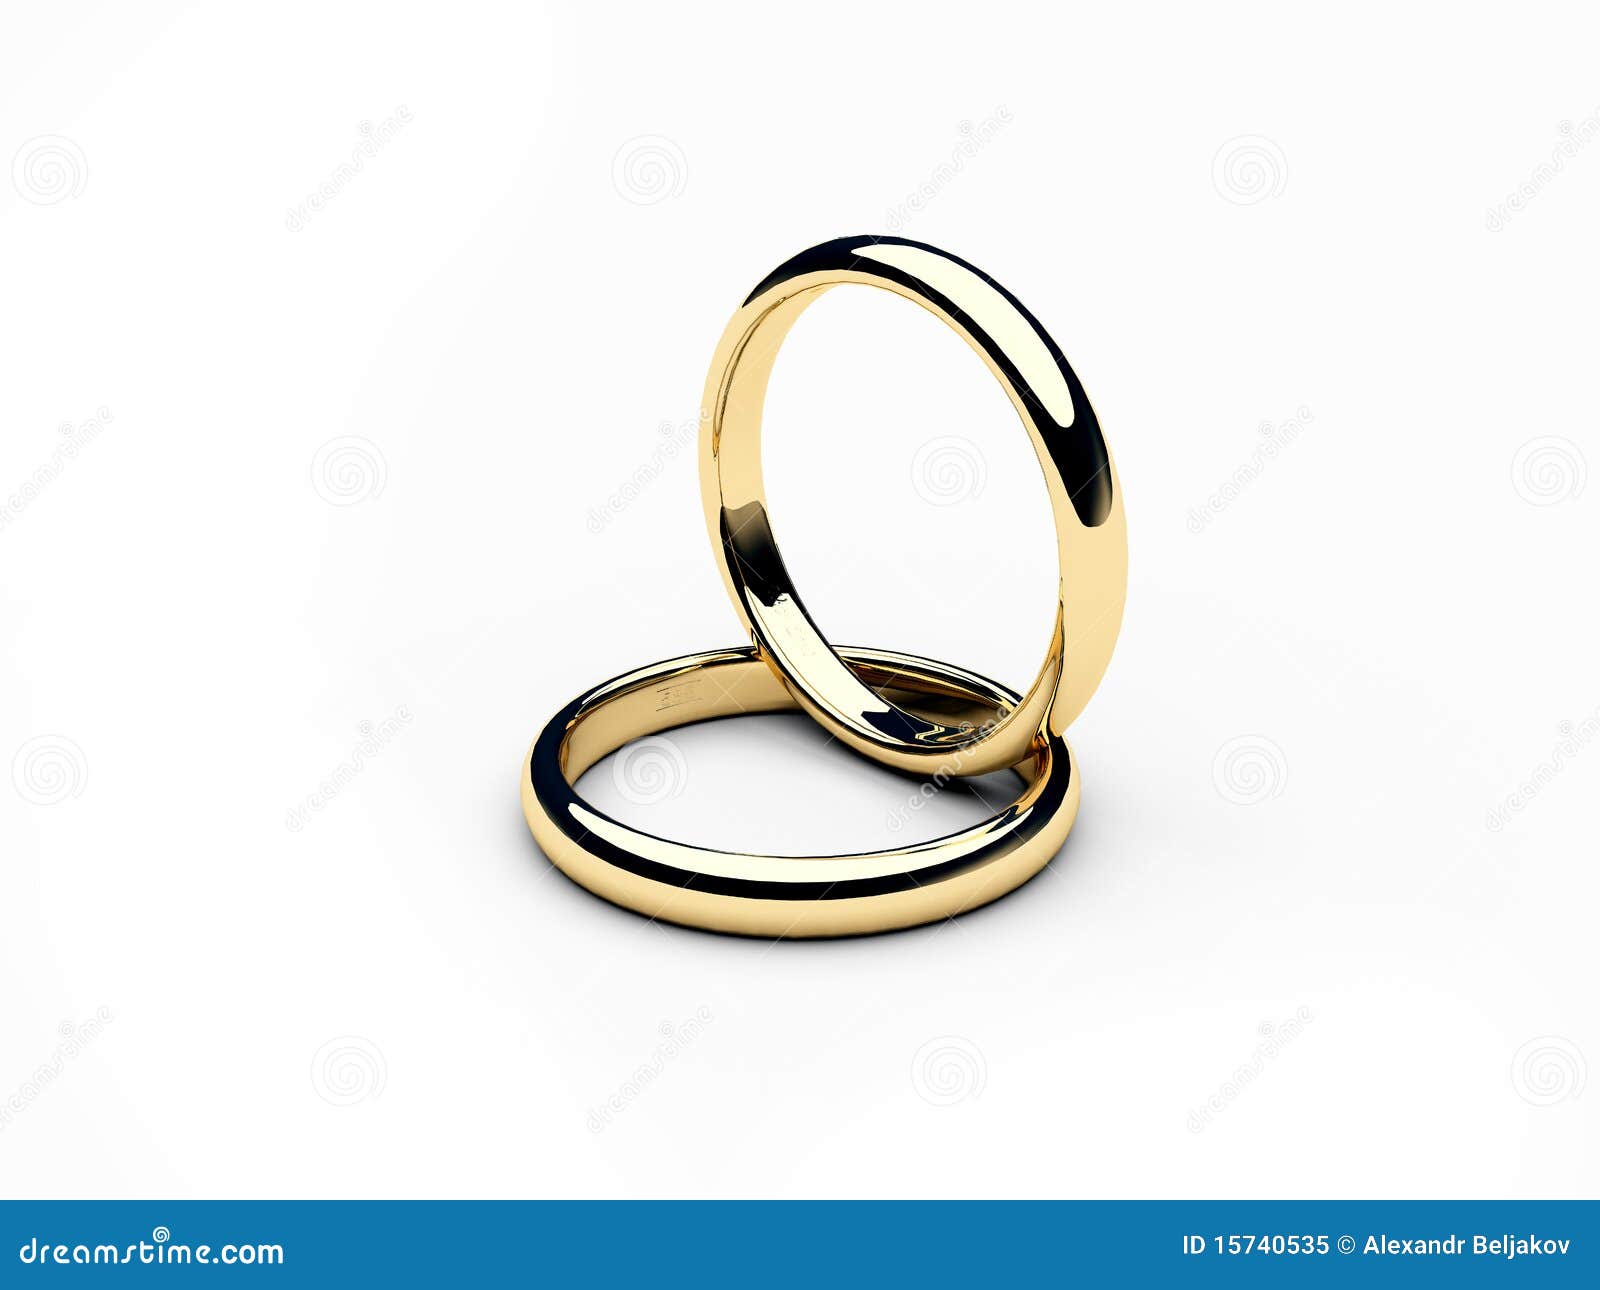 Two gold rings 2 stock illustration. Image of jewelry ...